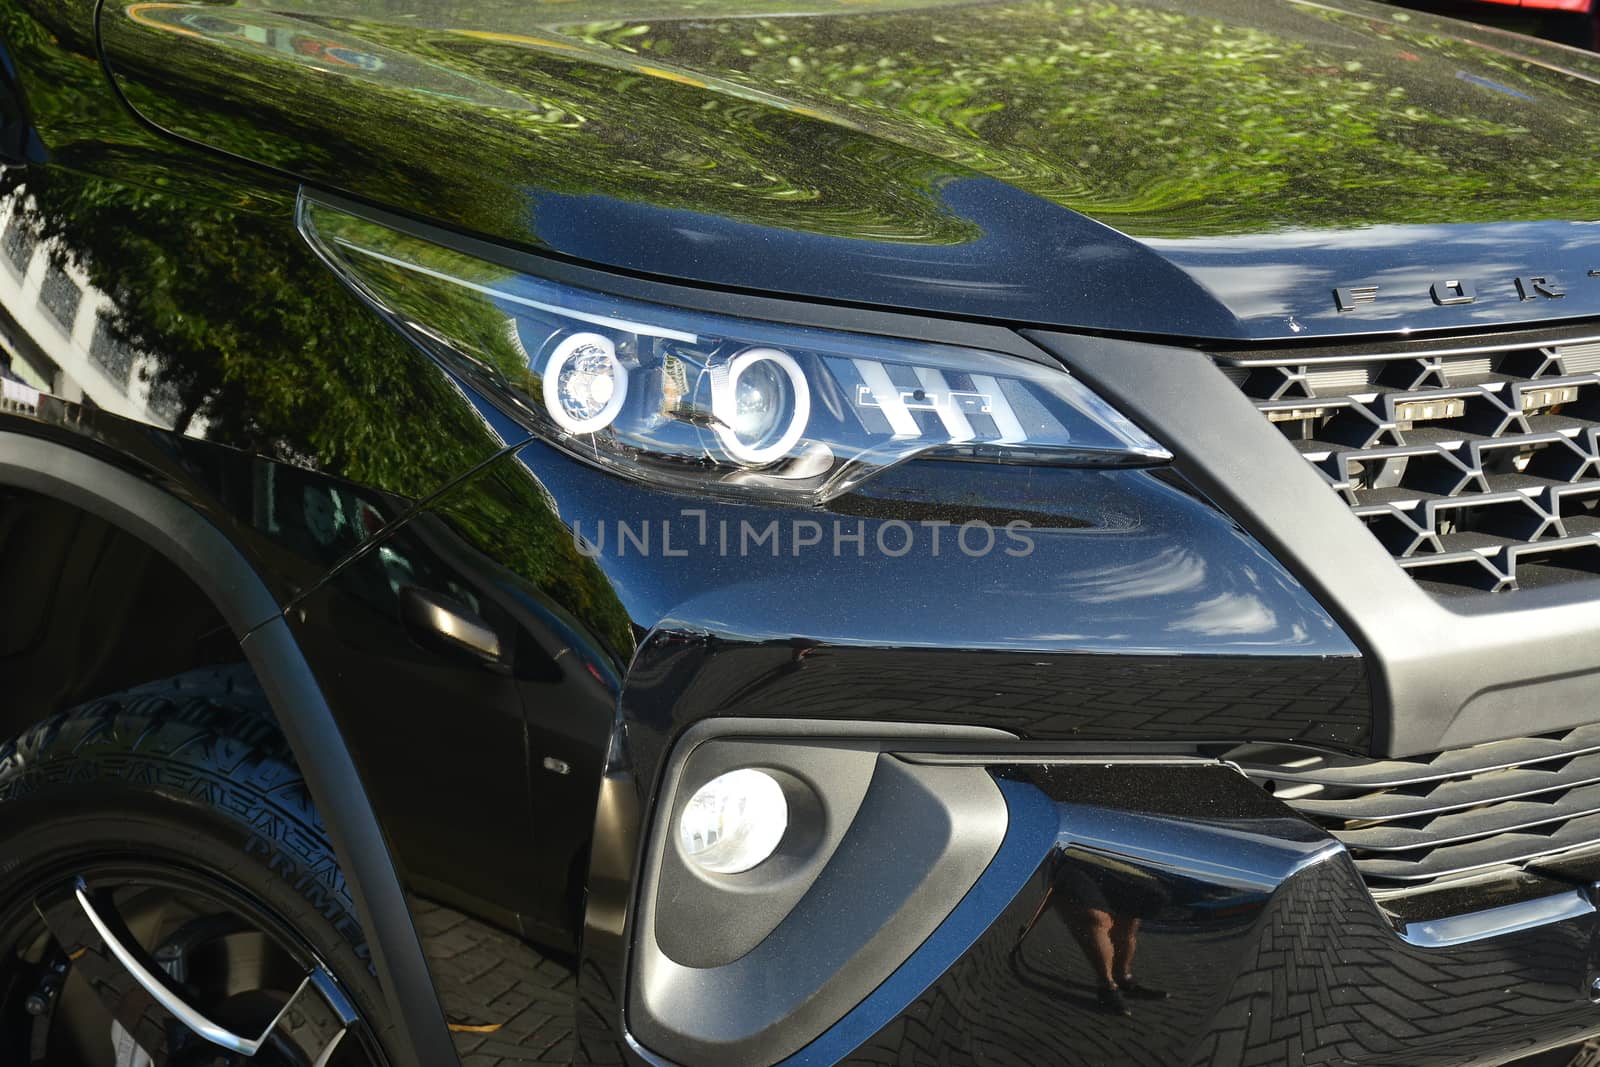 Toyota fortuner suv headlight at Bumper to Bumper car show in Pa by imwaltersy